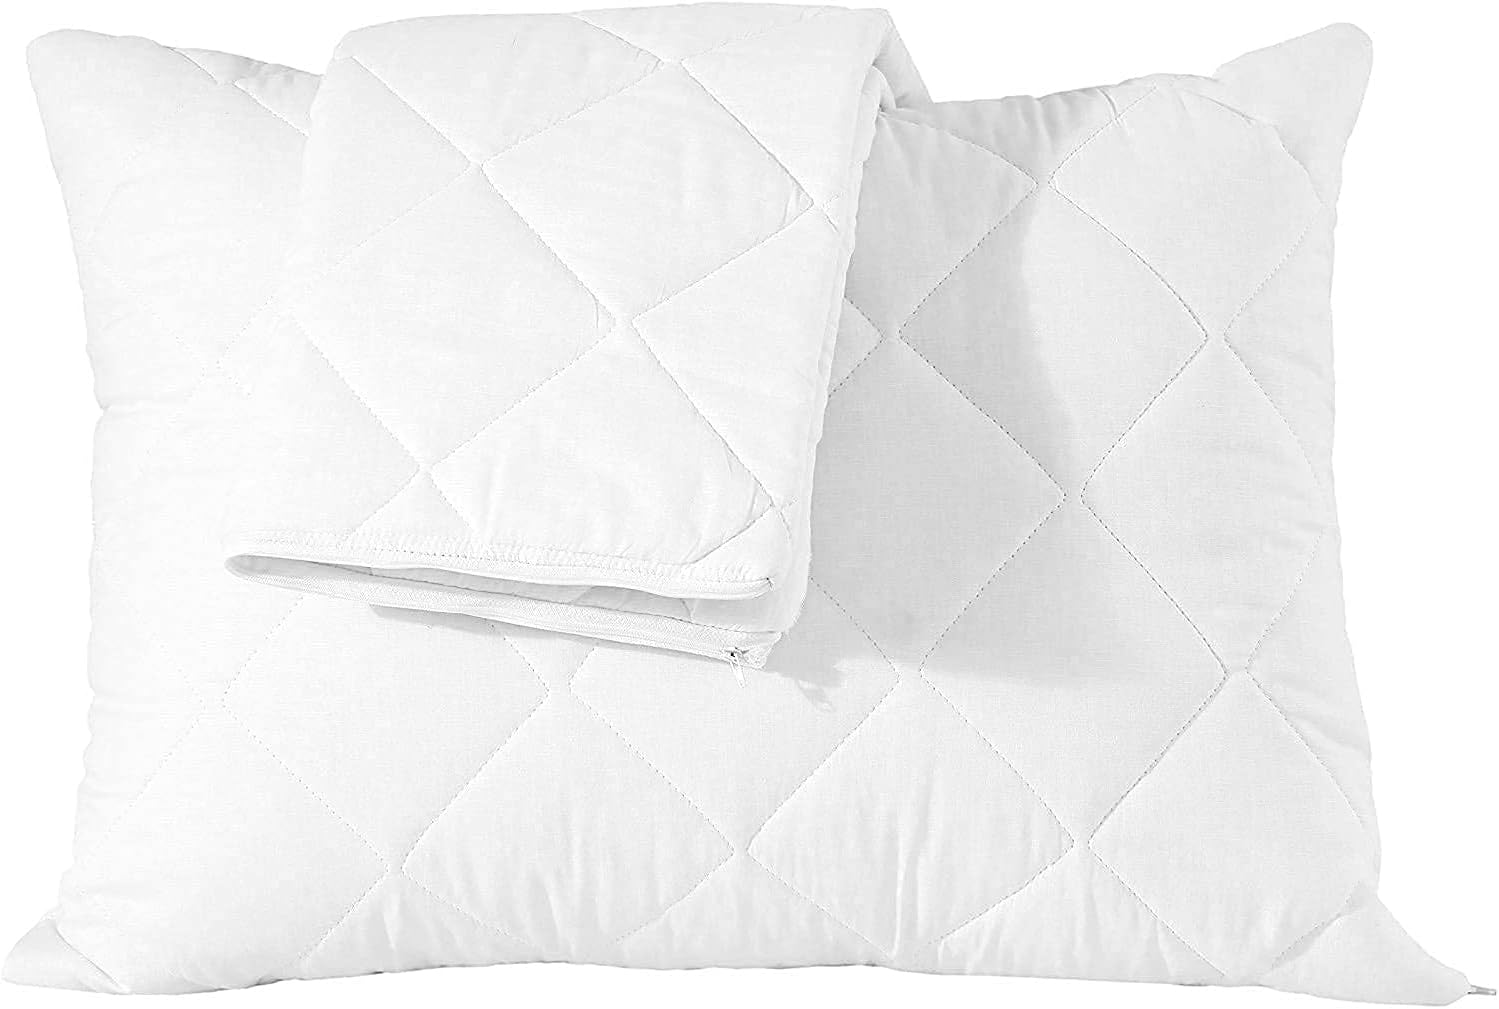 Thick Quilted Pillow Protectors Pair Feather Proof Standard 20x26Inches Extra Soft Ultra Plush White Zippered Set of 2 Size Encasement